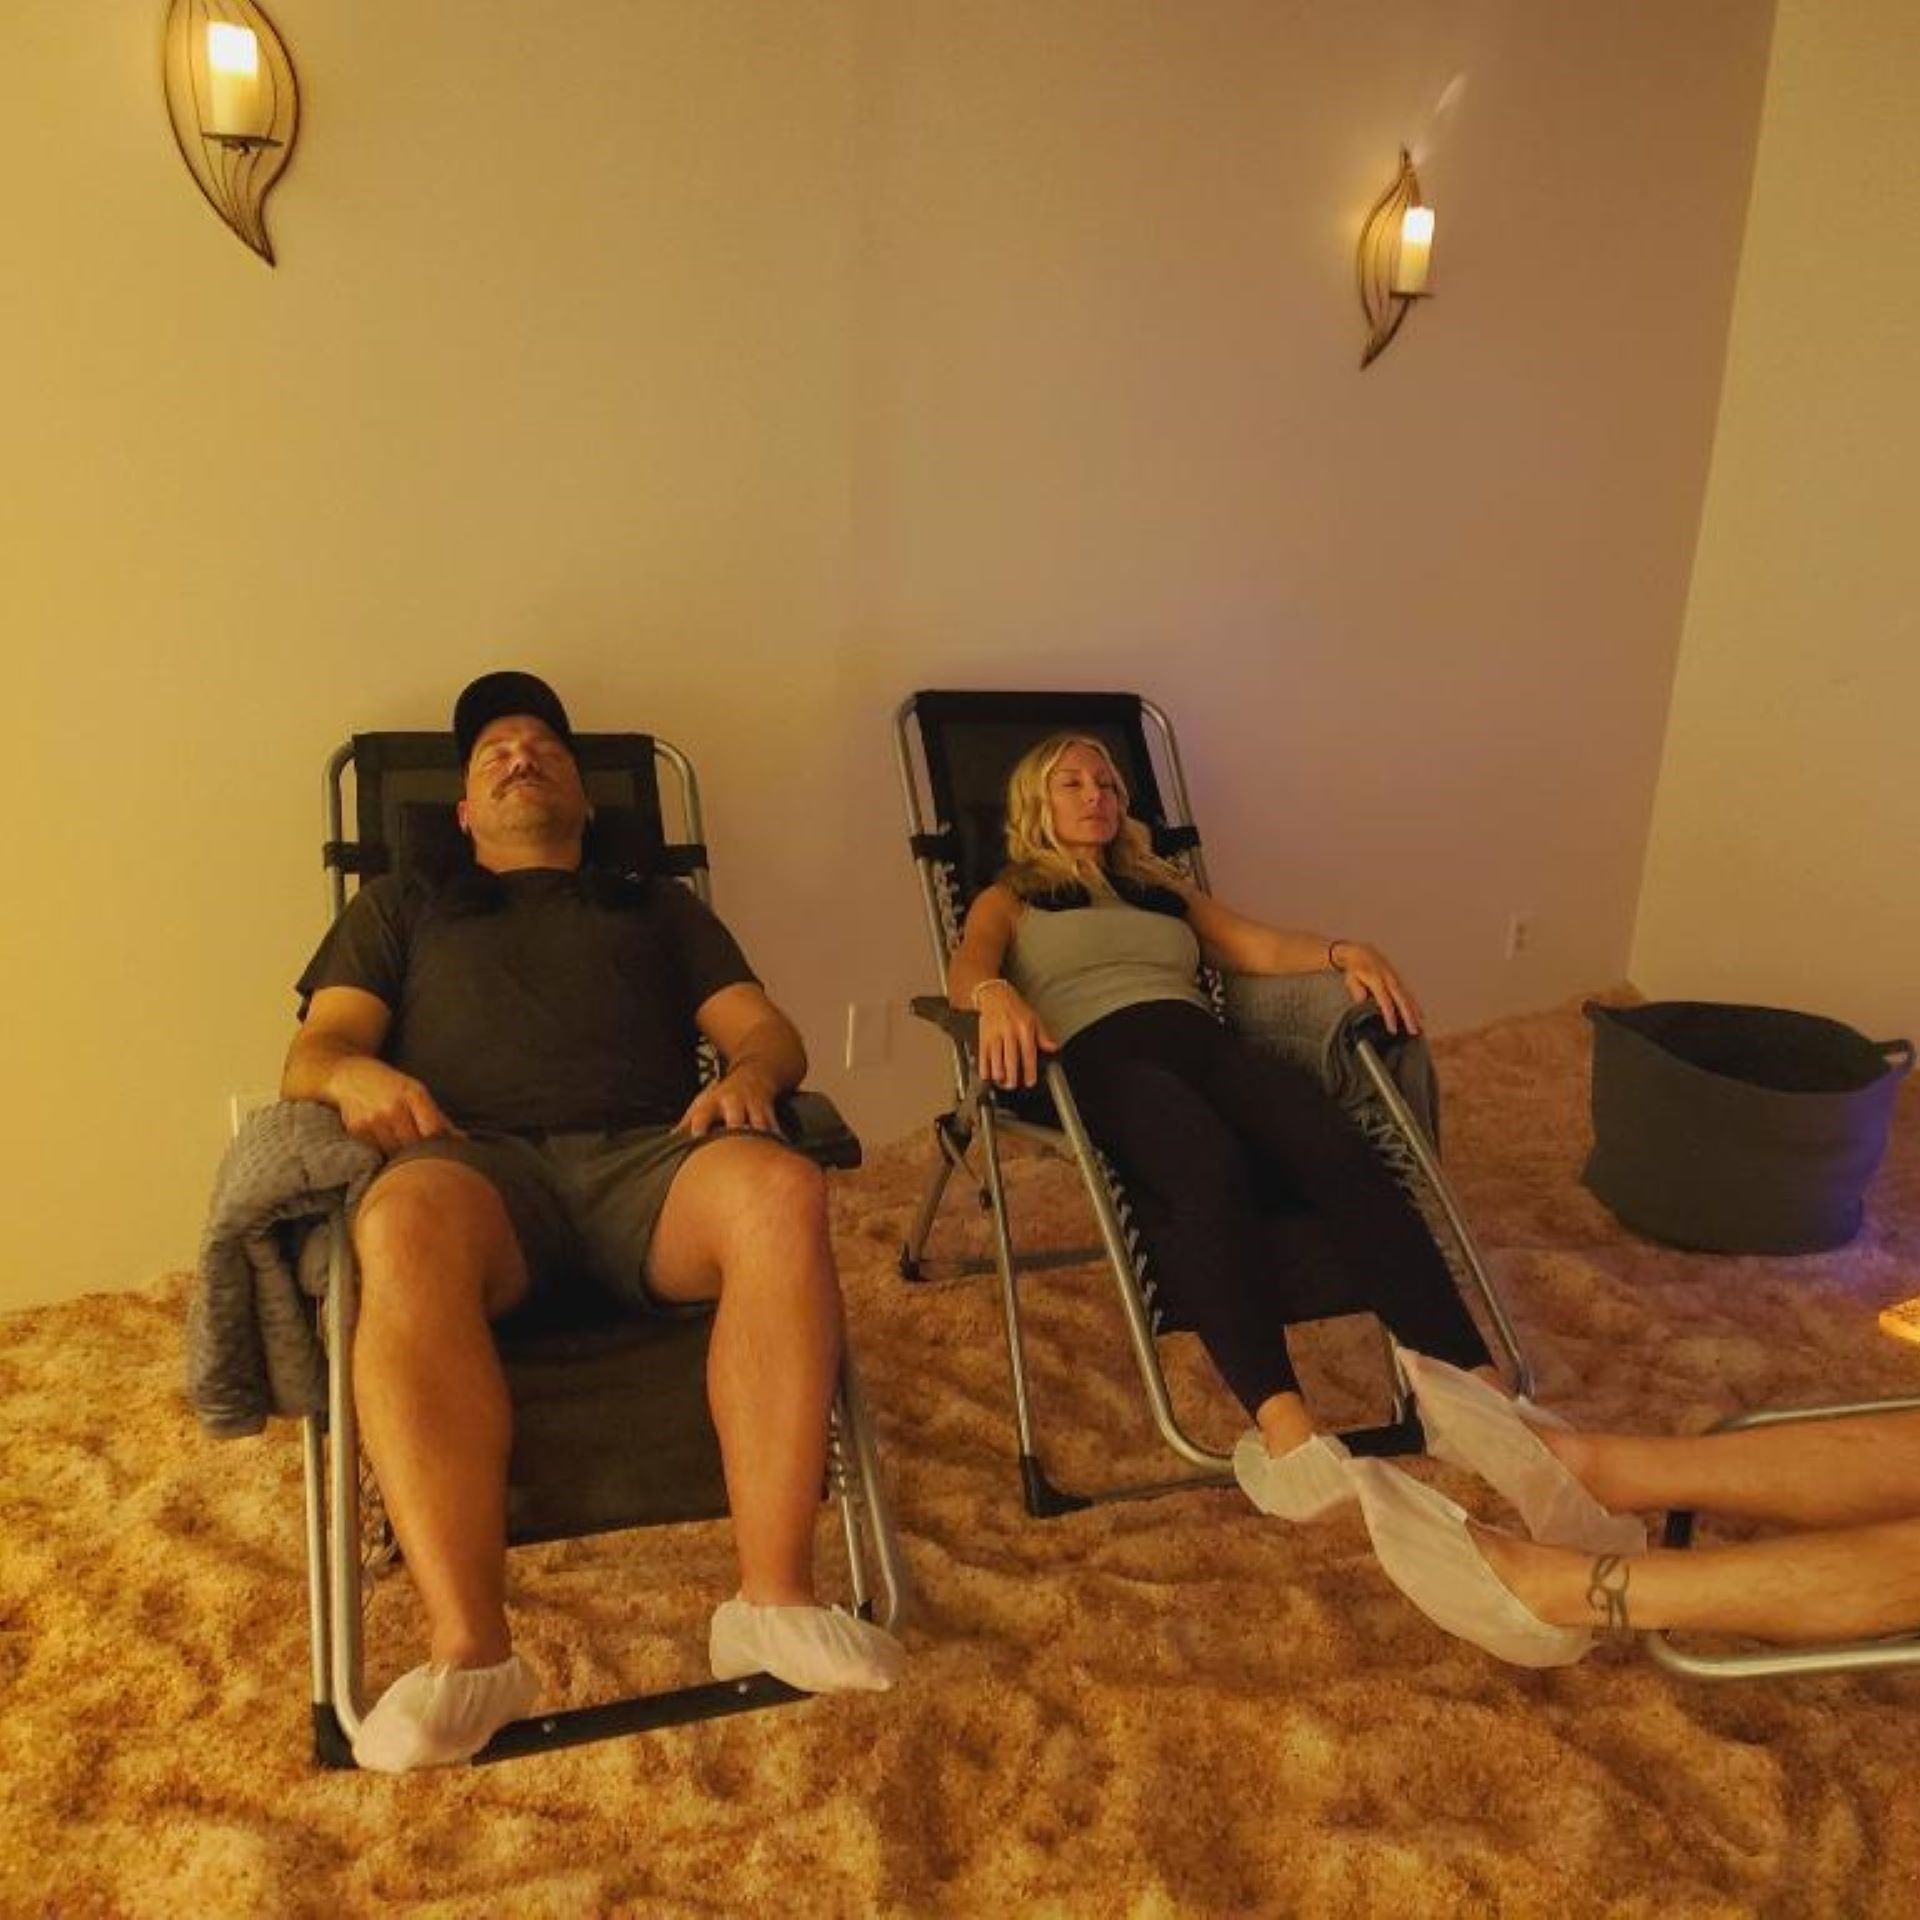 a man and a woman are sitting in chairs in a room